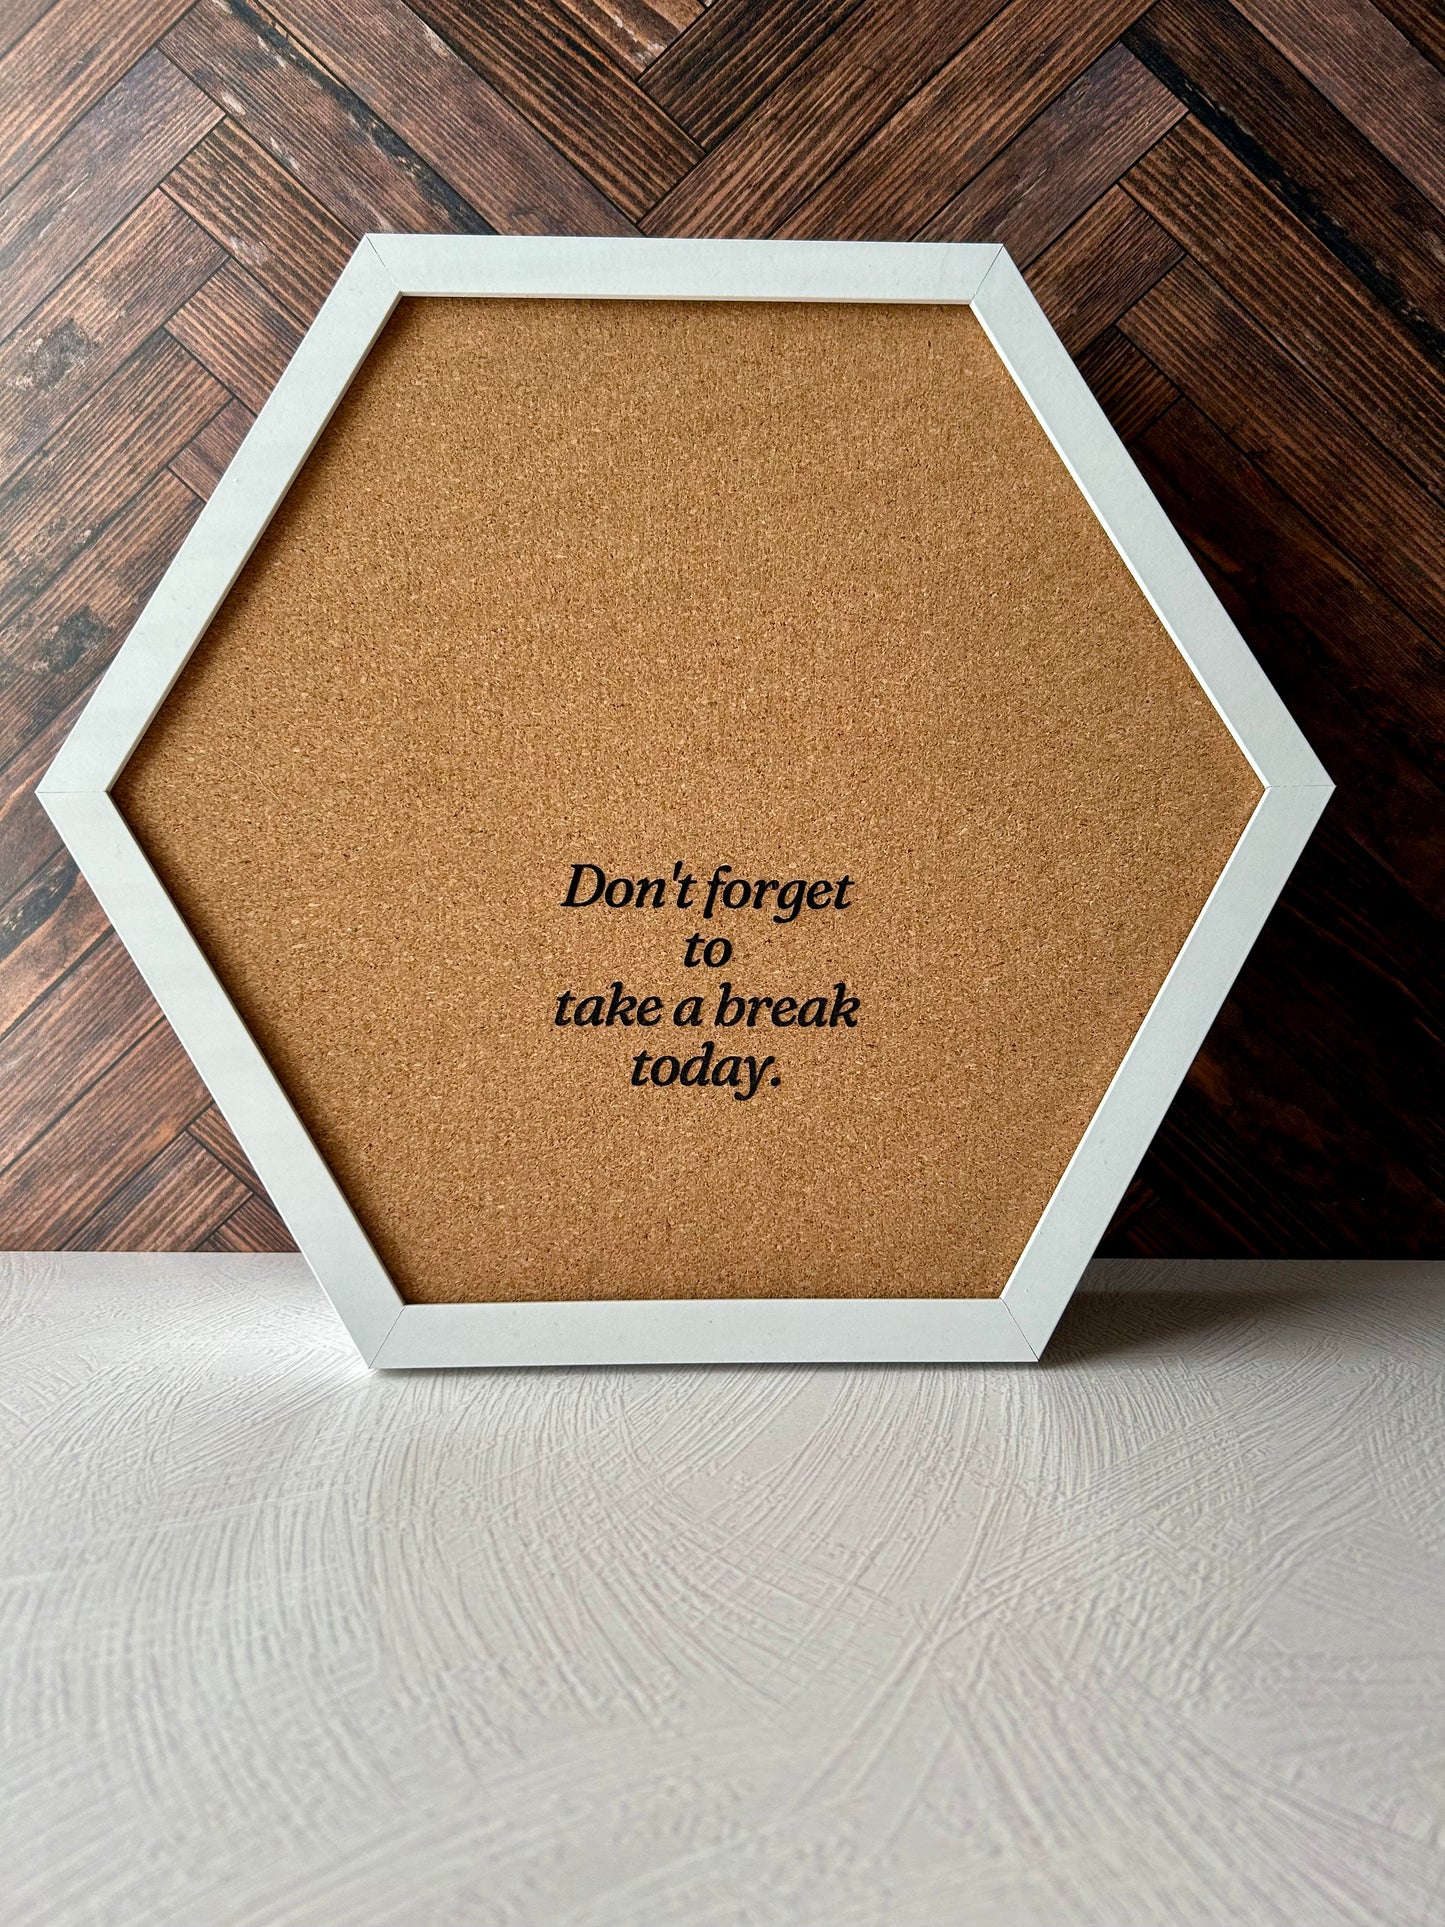 Motivation Station: Customizable Cork Boards for Students and Dreamers